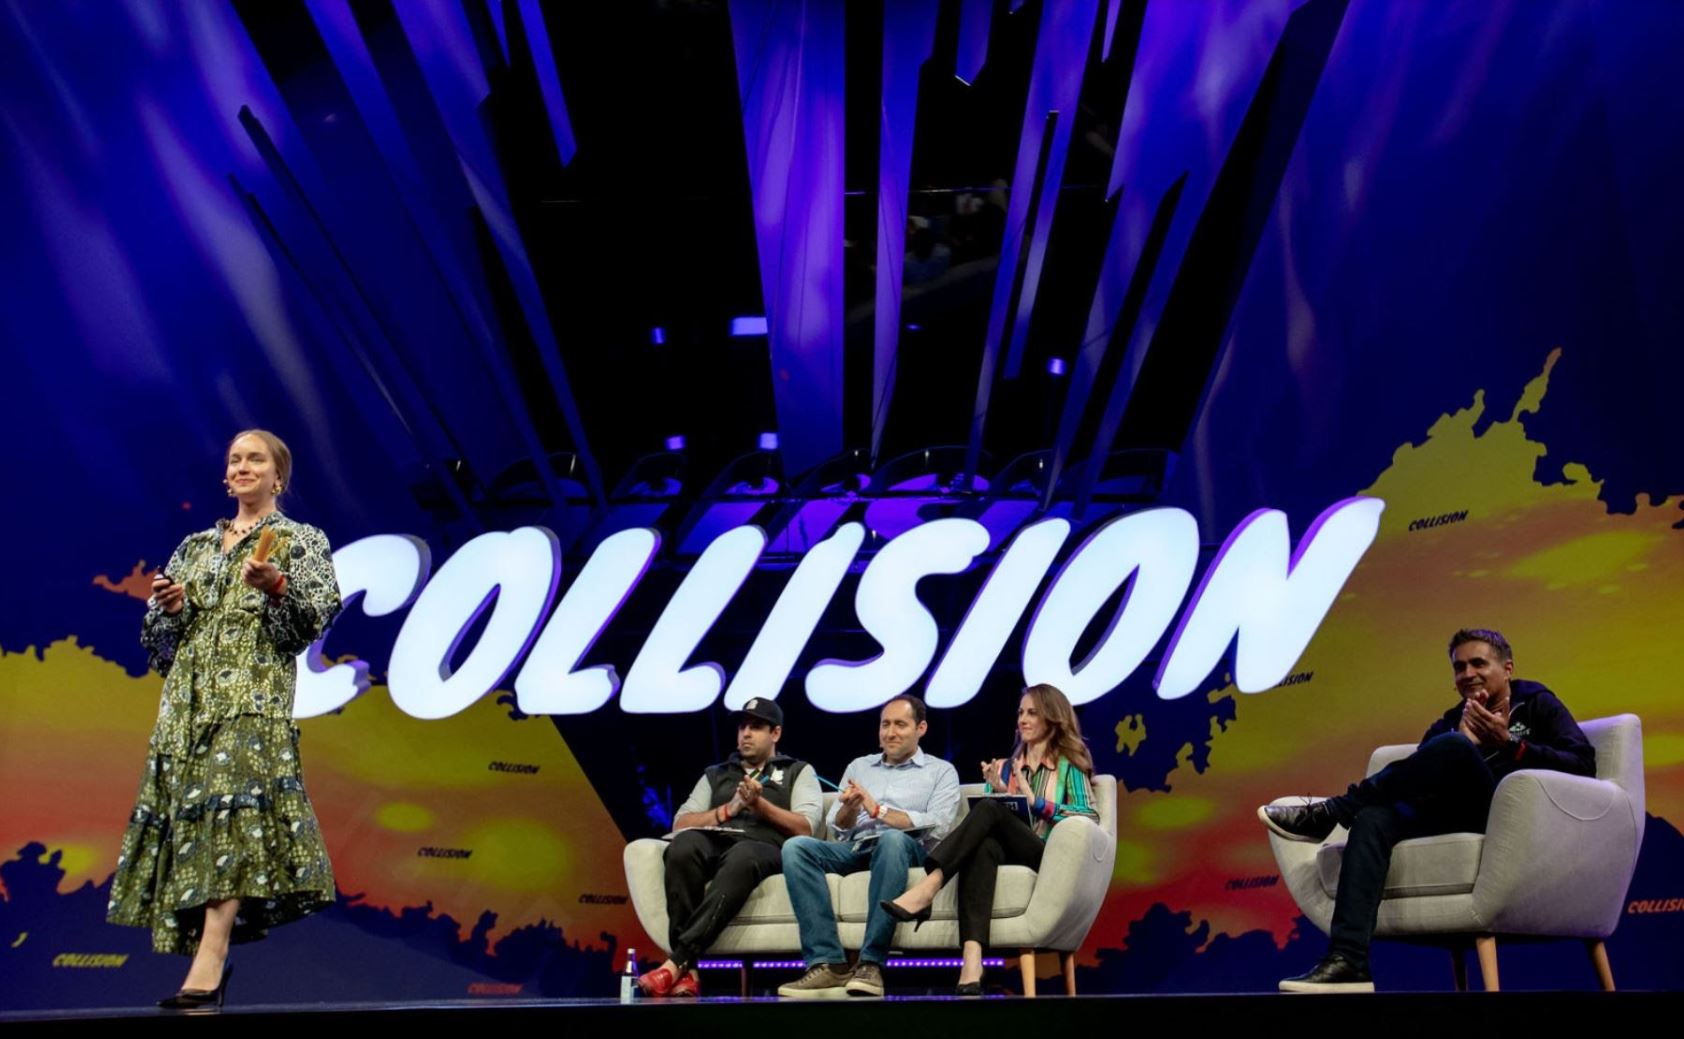 Builder takes to Collision Conference 2019 in Toronto